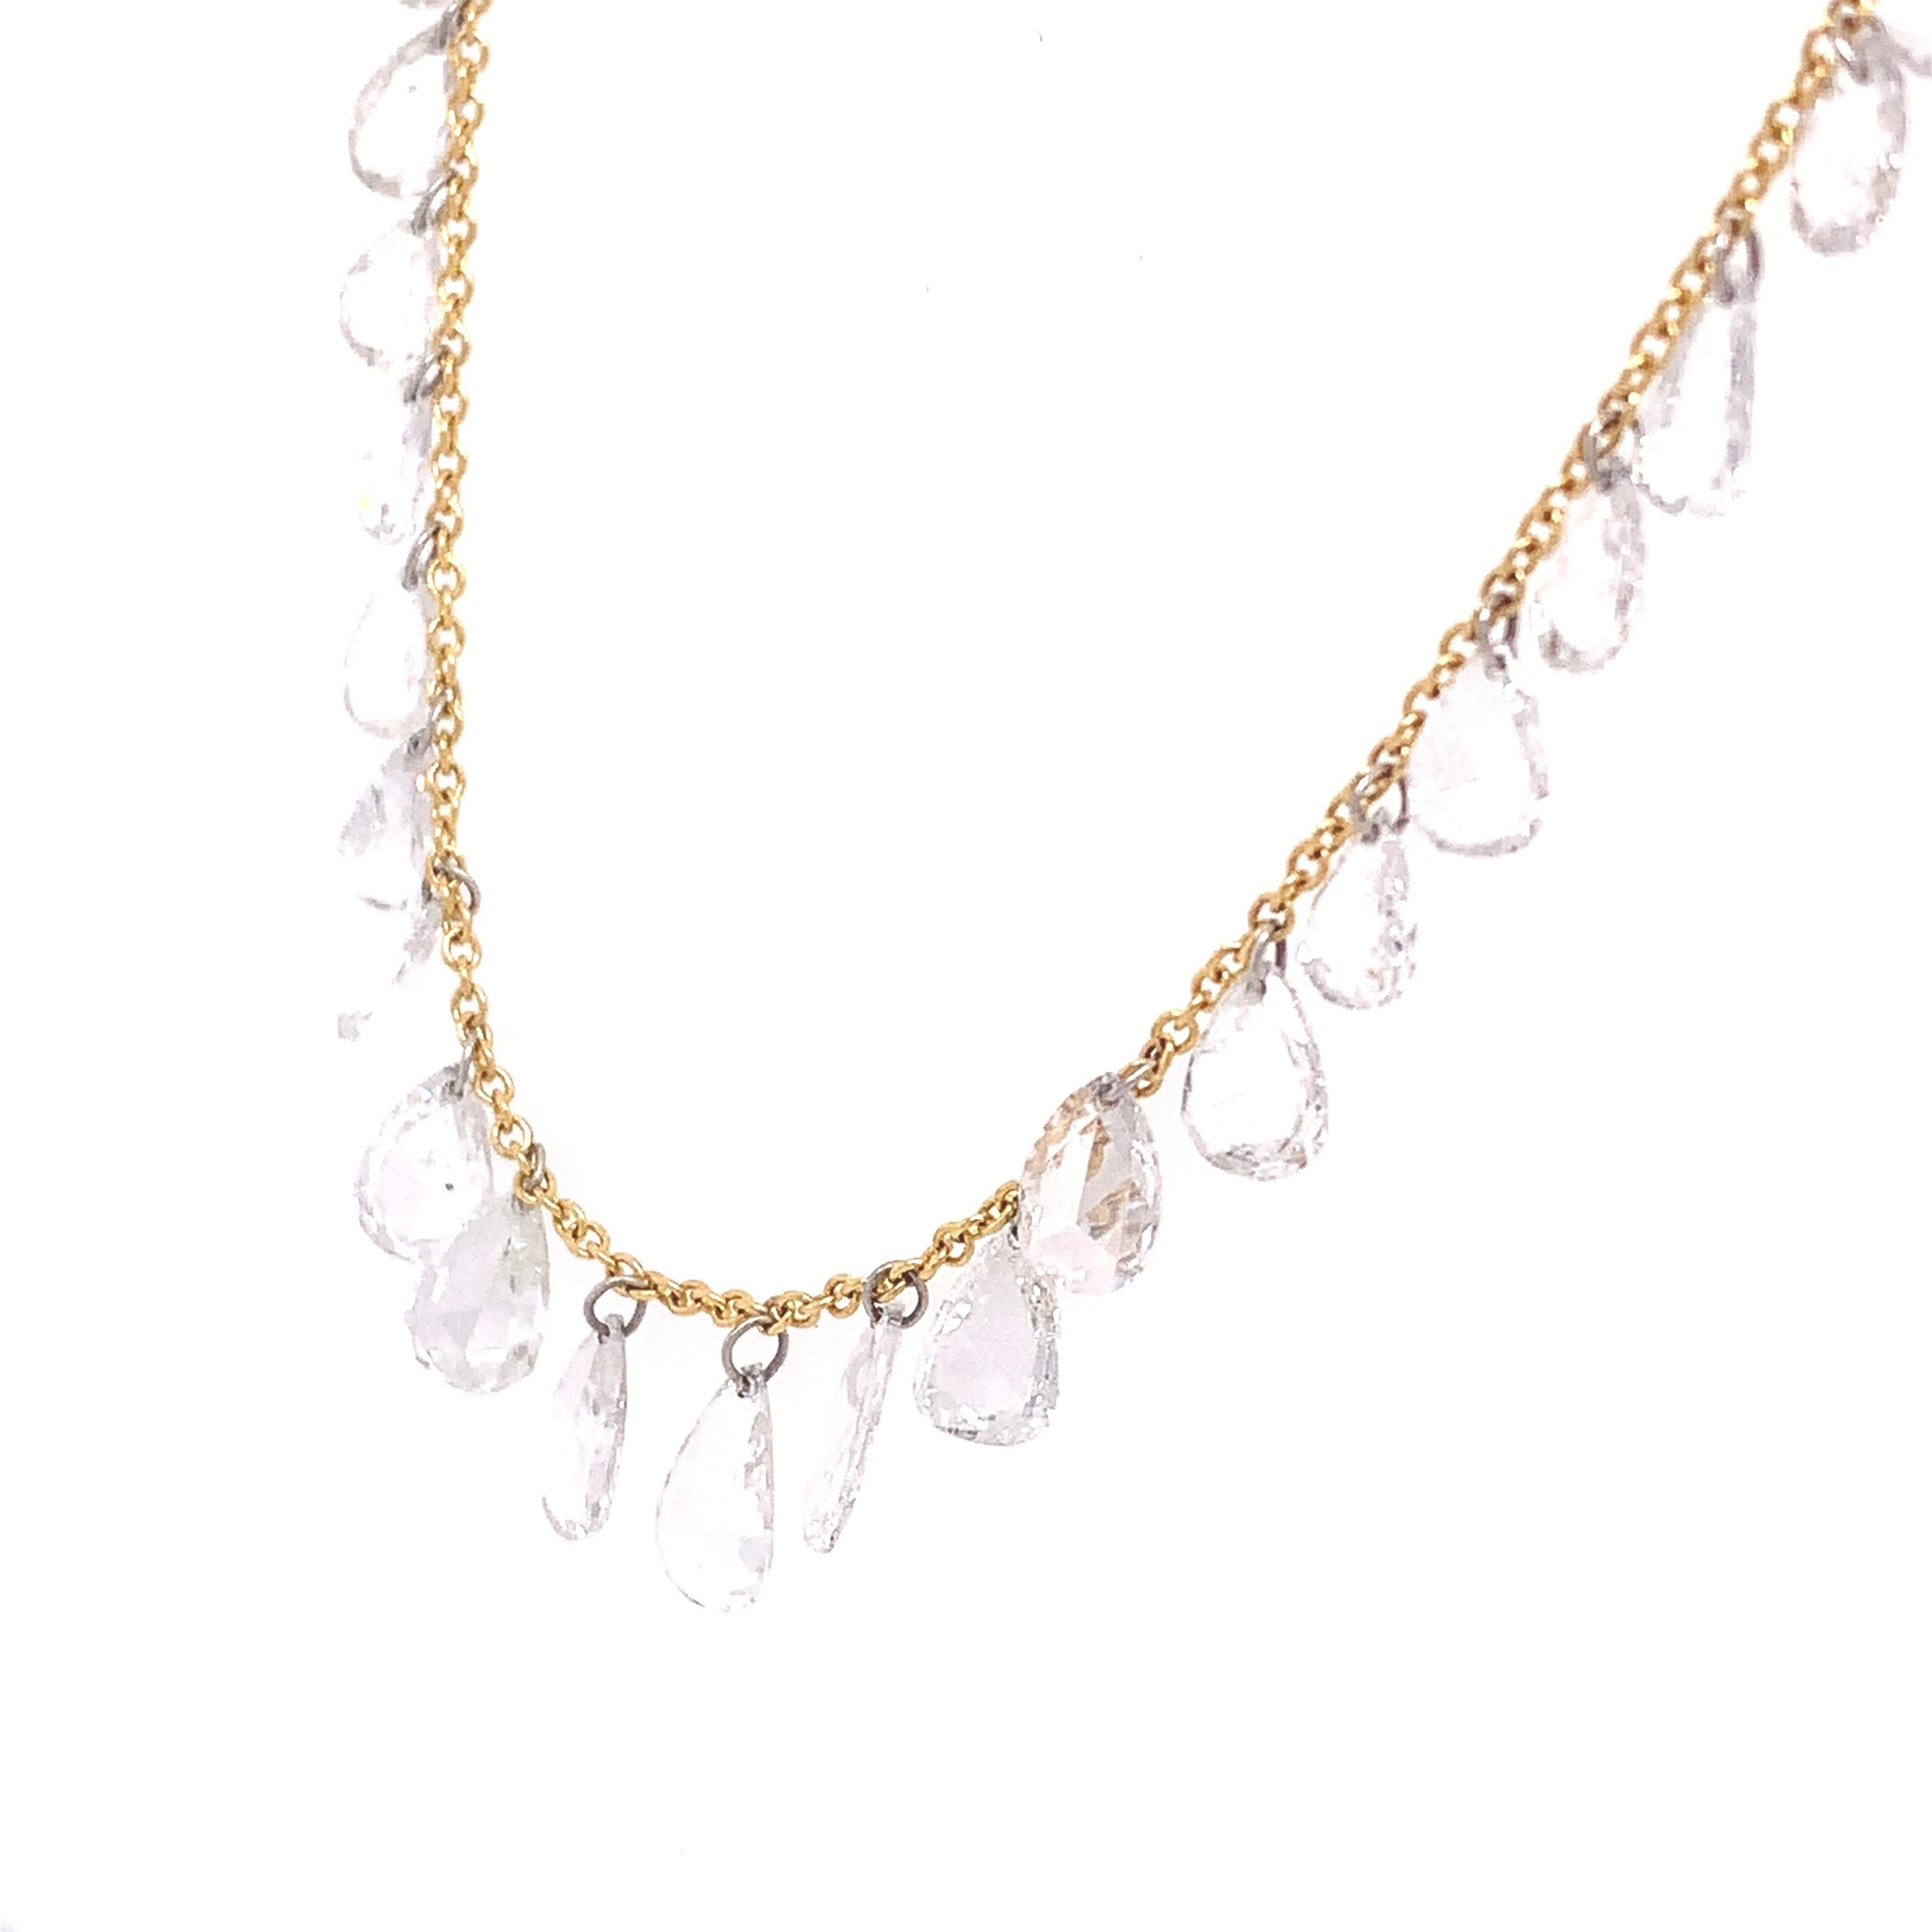 Dainty Collection

The everyday refinement of Yellow Gold gently sparkles with a fringe of 62 brilliant rose-cut Diamonds in this magnificent necklace